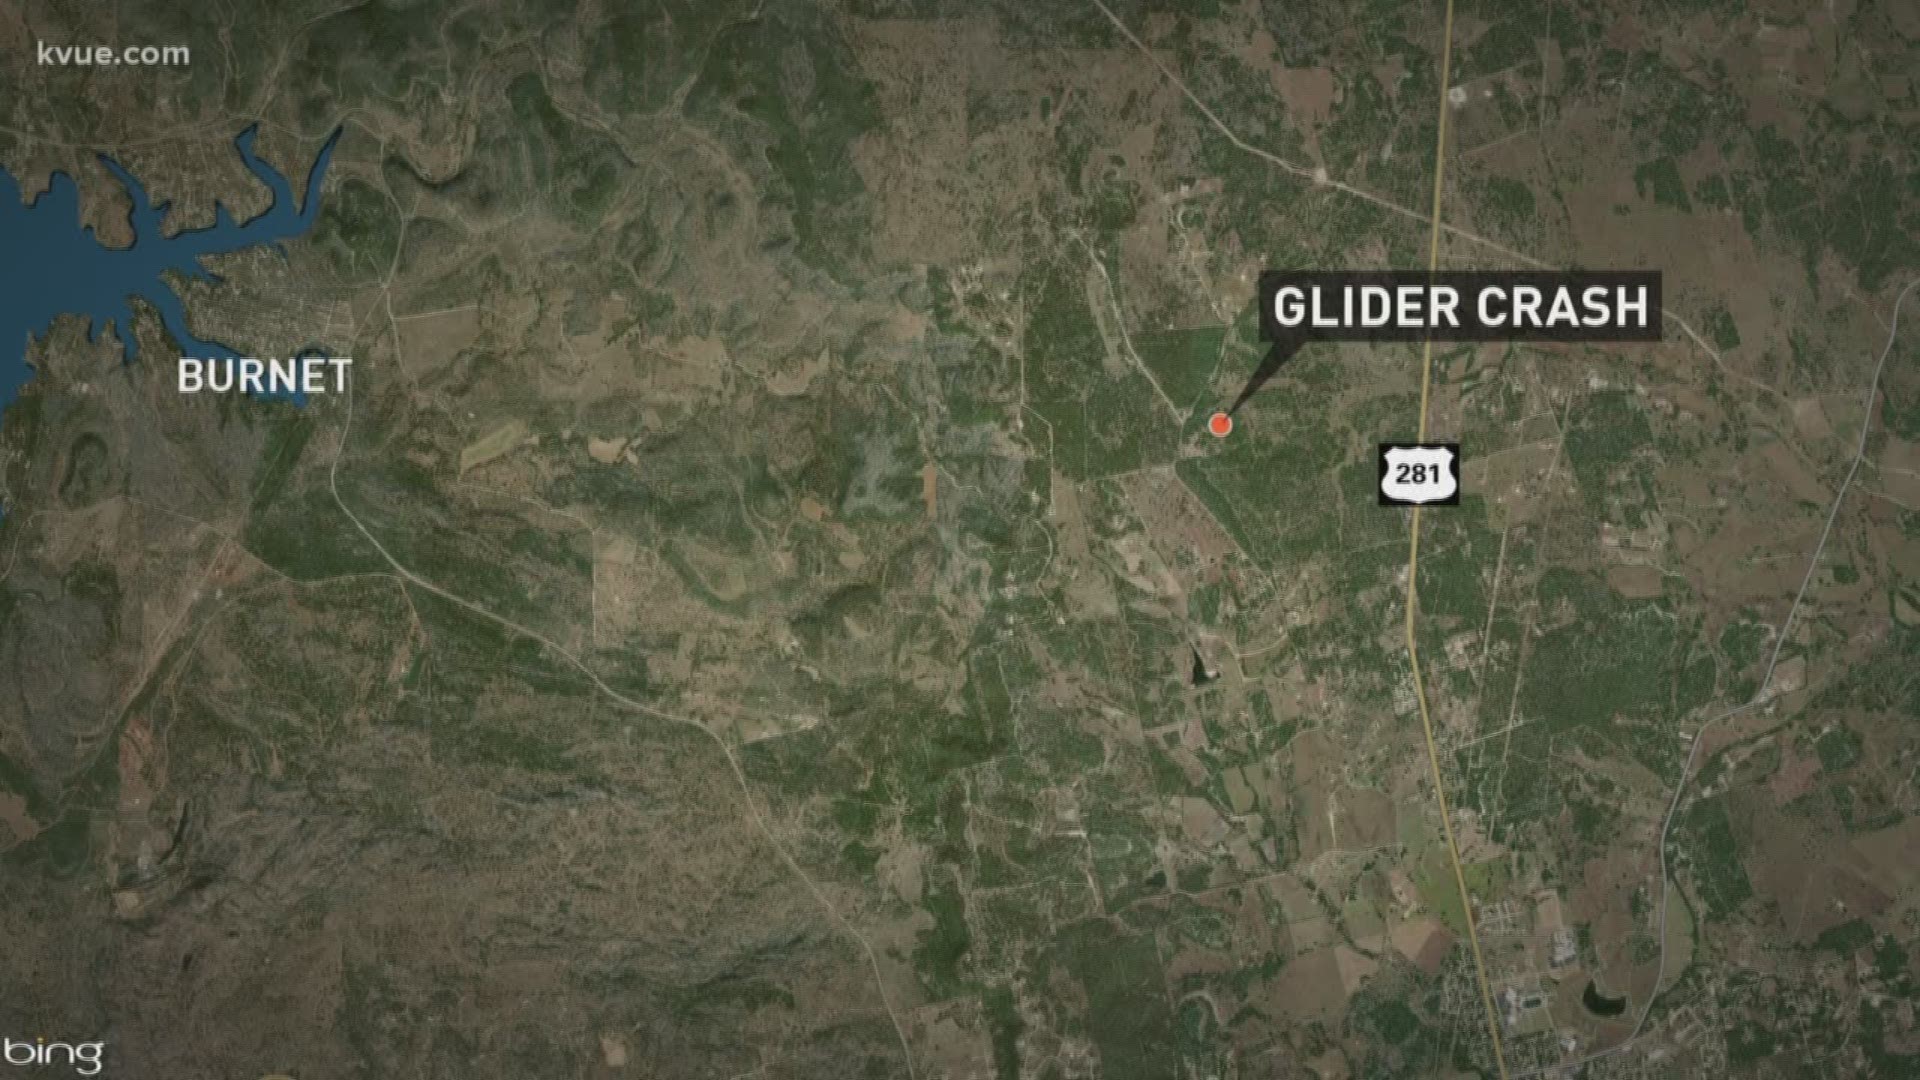 A DPS spokesman told KVUE that troopers responded at 3:48 p.m. and was advised that there were injuries, but did not clarify an approximate number. According to KVUE media partner the Austin American Statesman, the pilot of the glider sustained minor inju